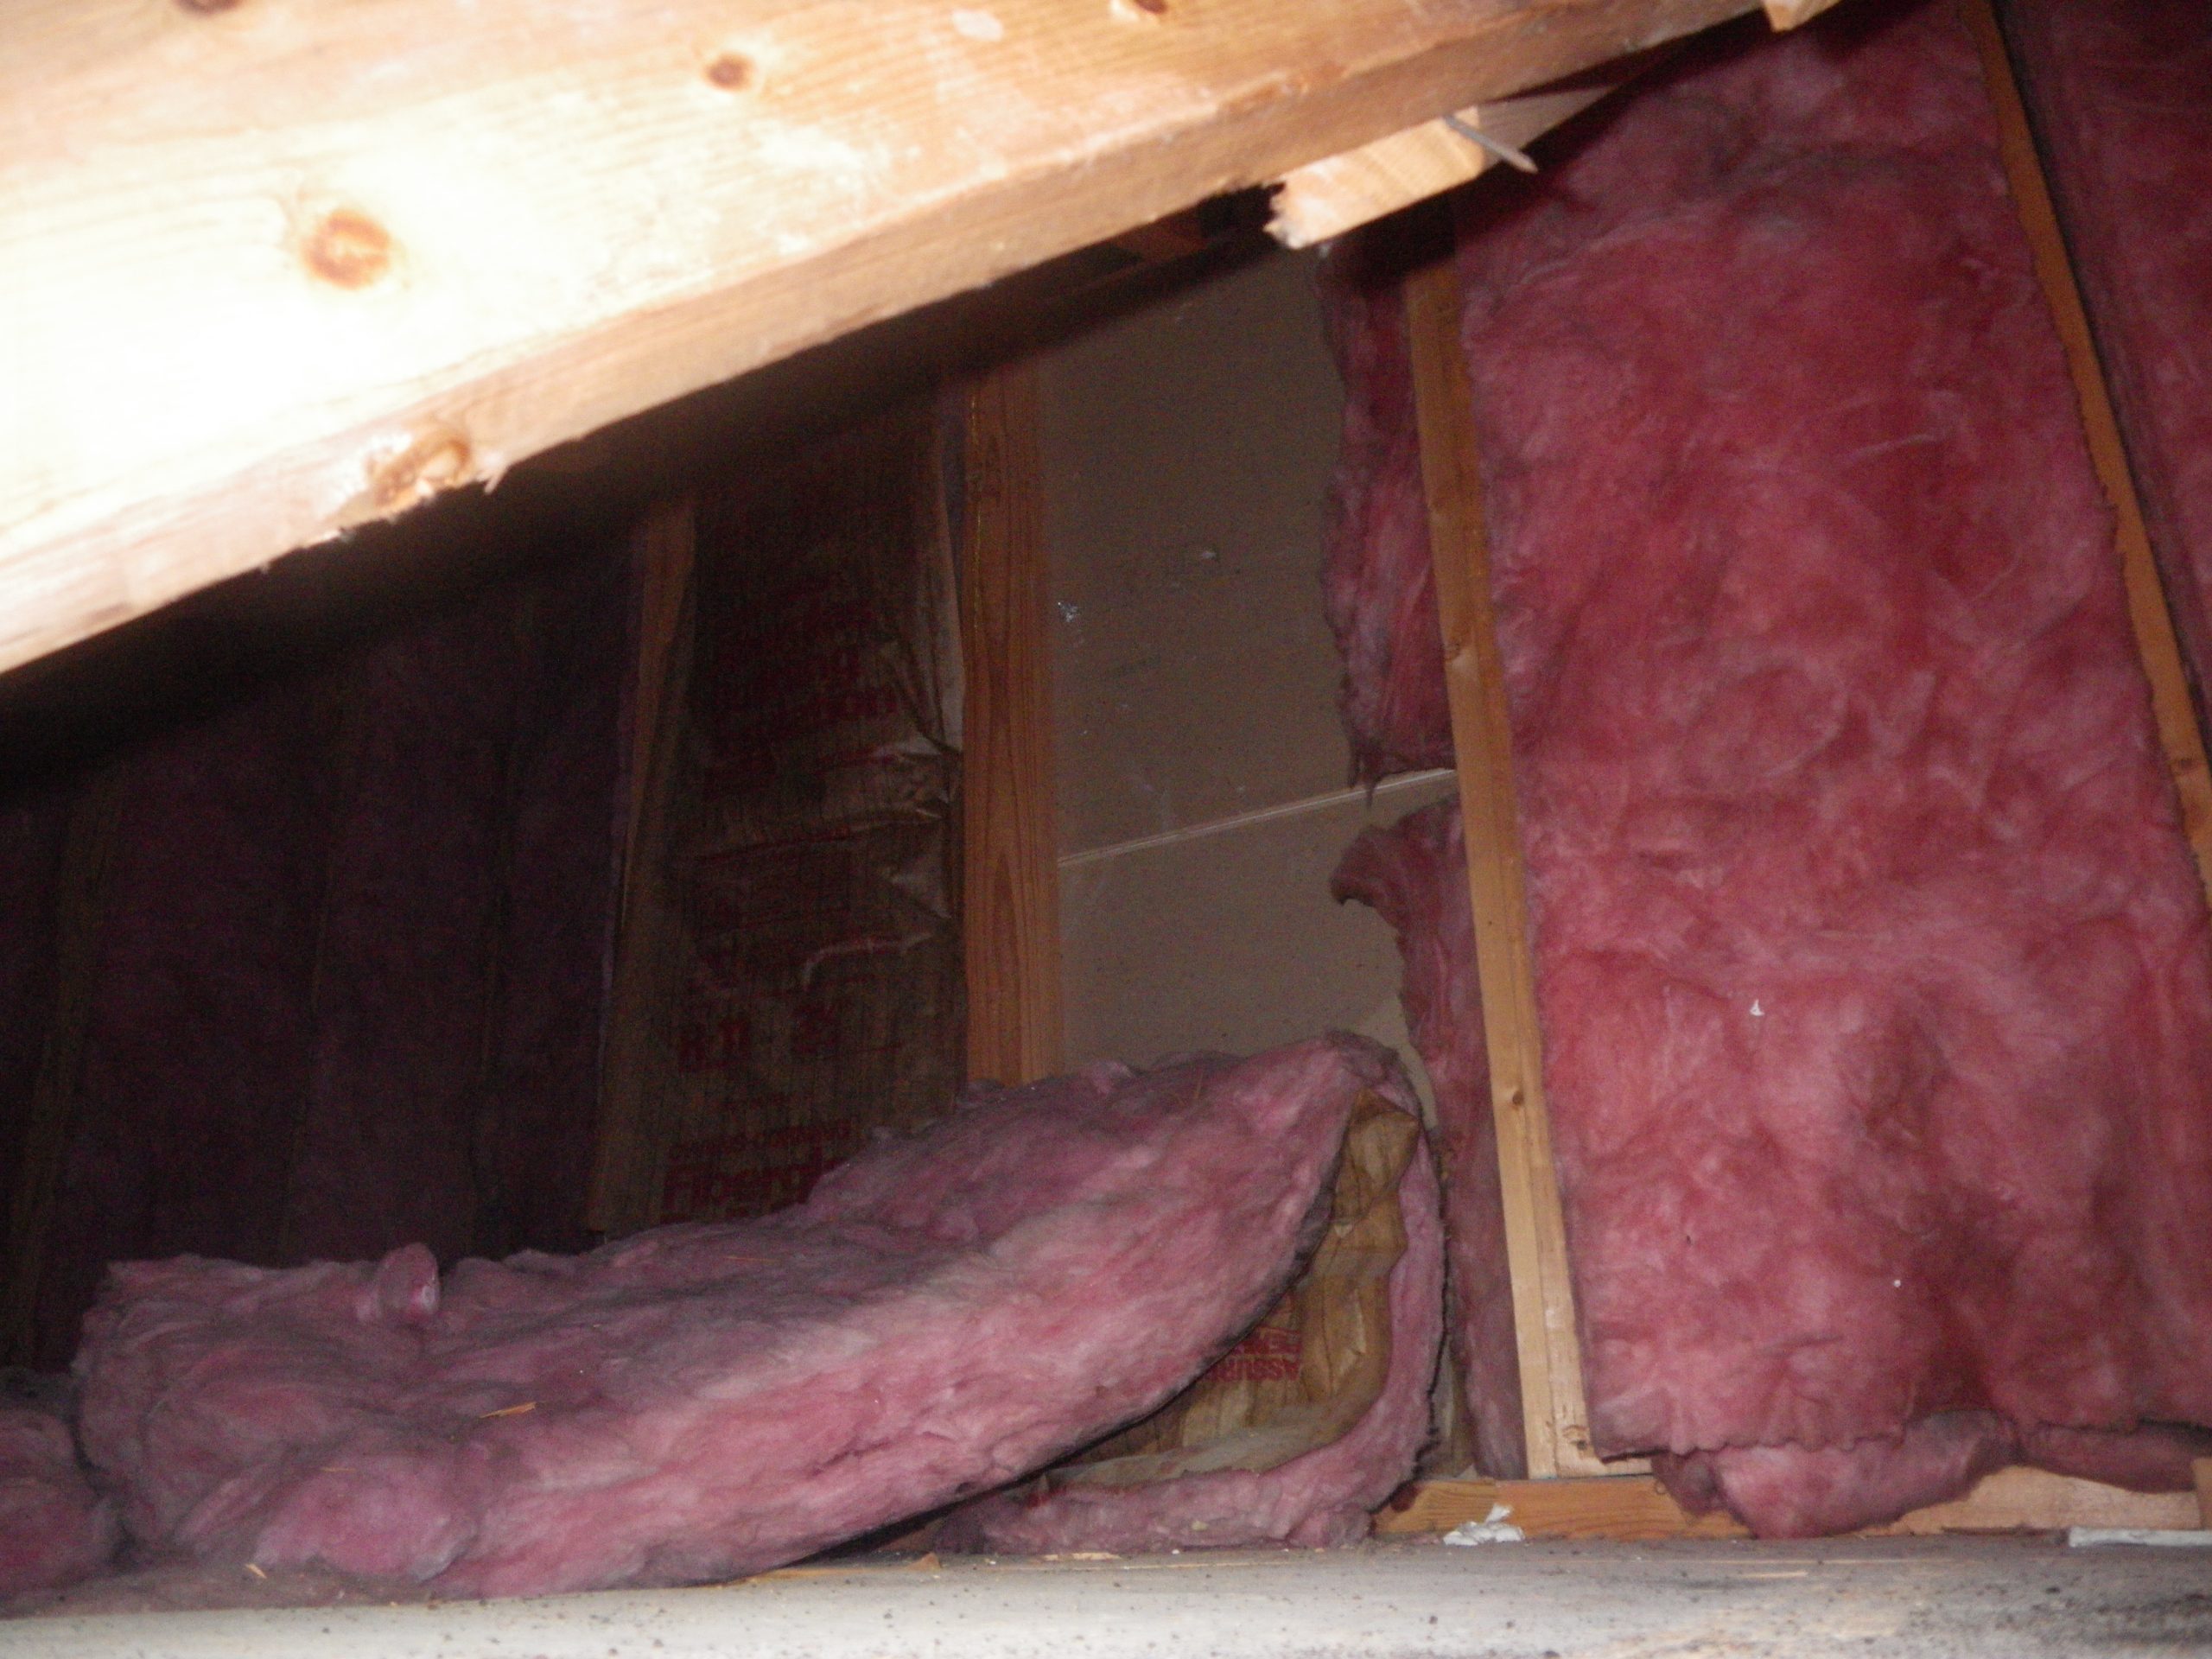 Attic insulation unsupported and falling from wall